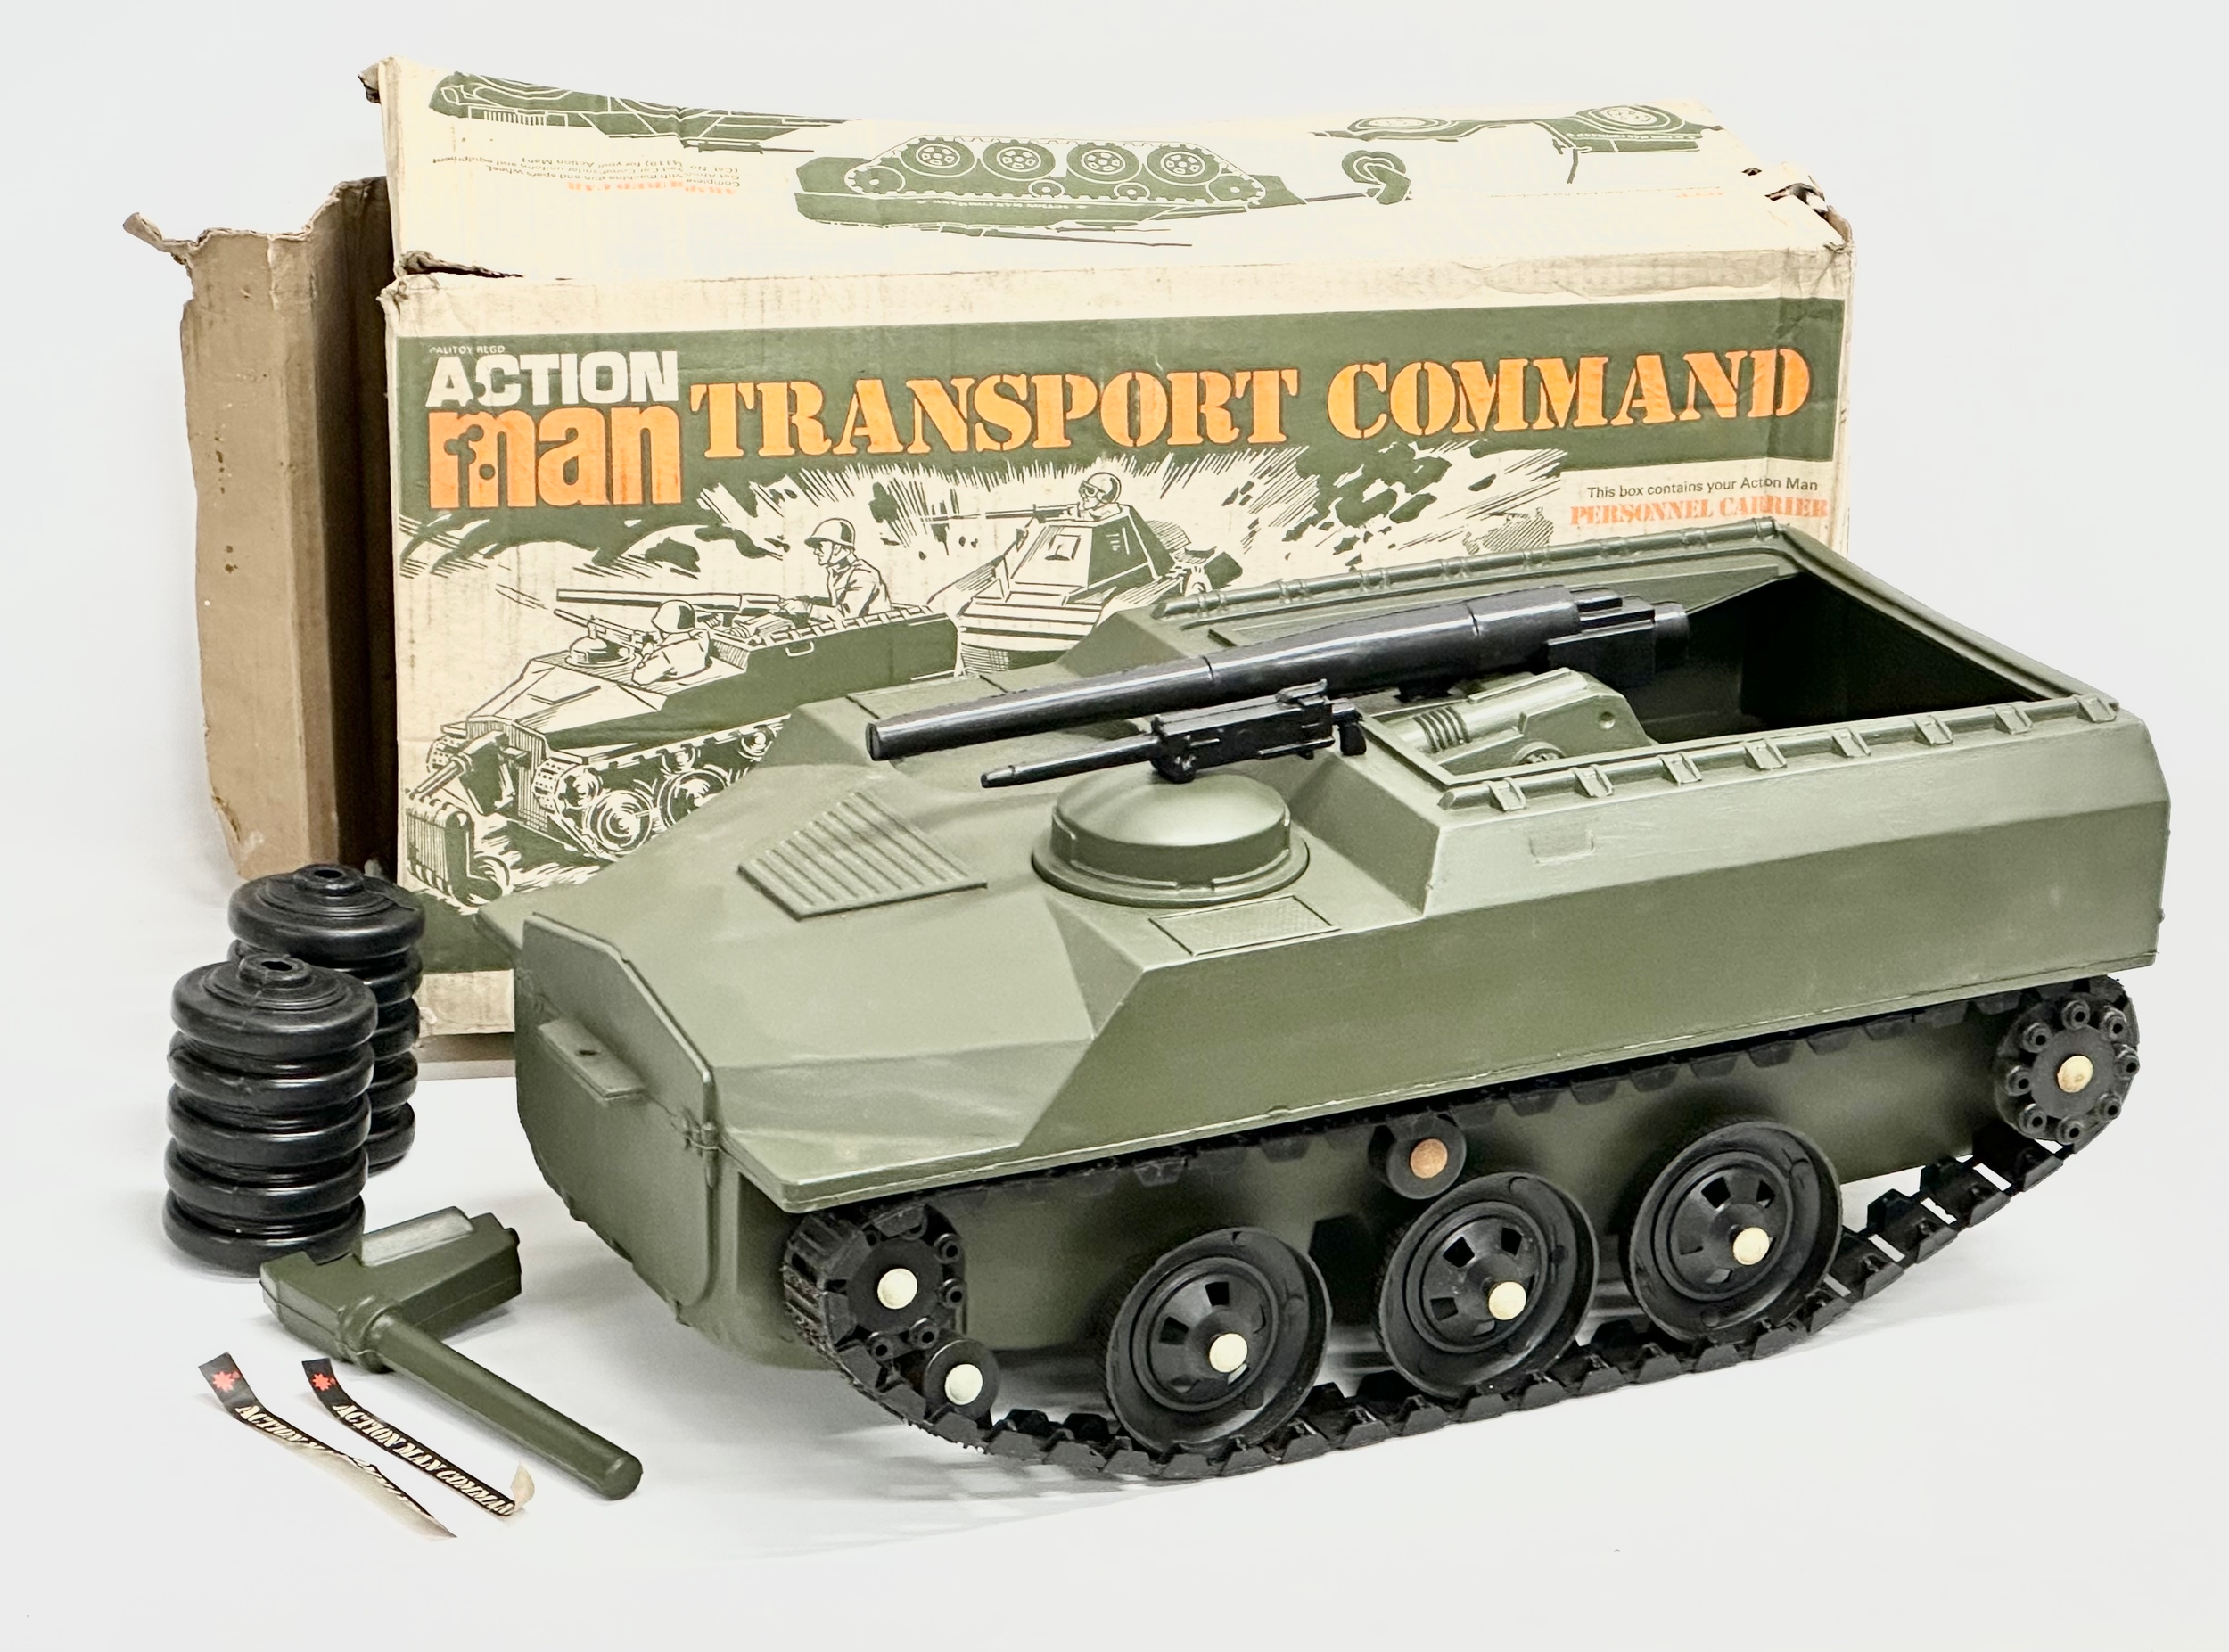 A 1967 Action Man Transport Command Personnel Carrier with original box. By Palitoy.